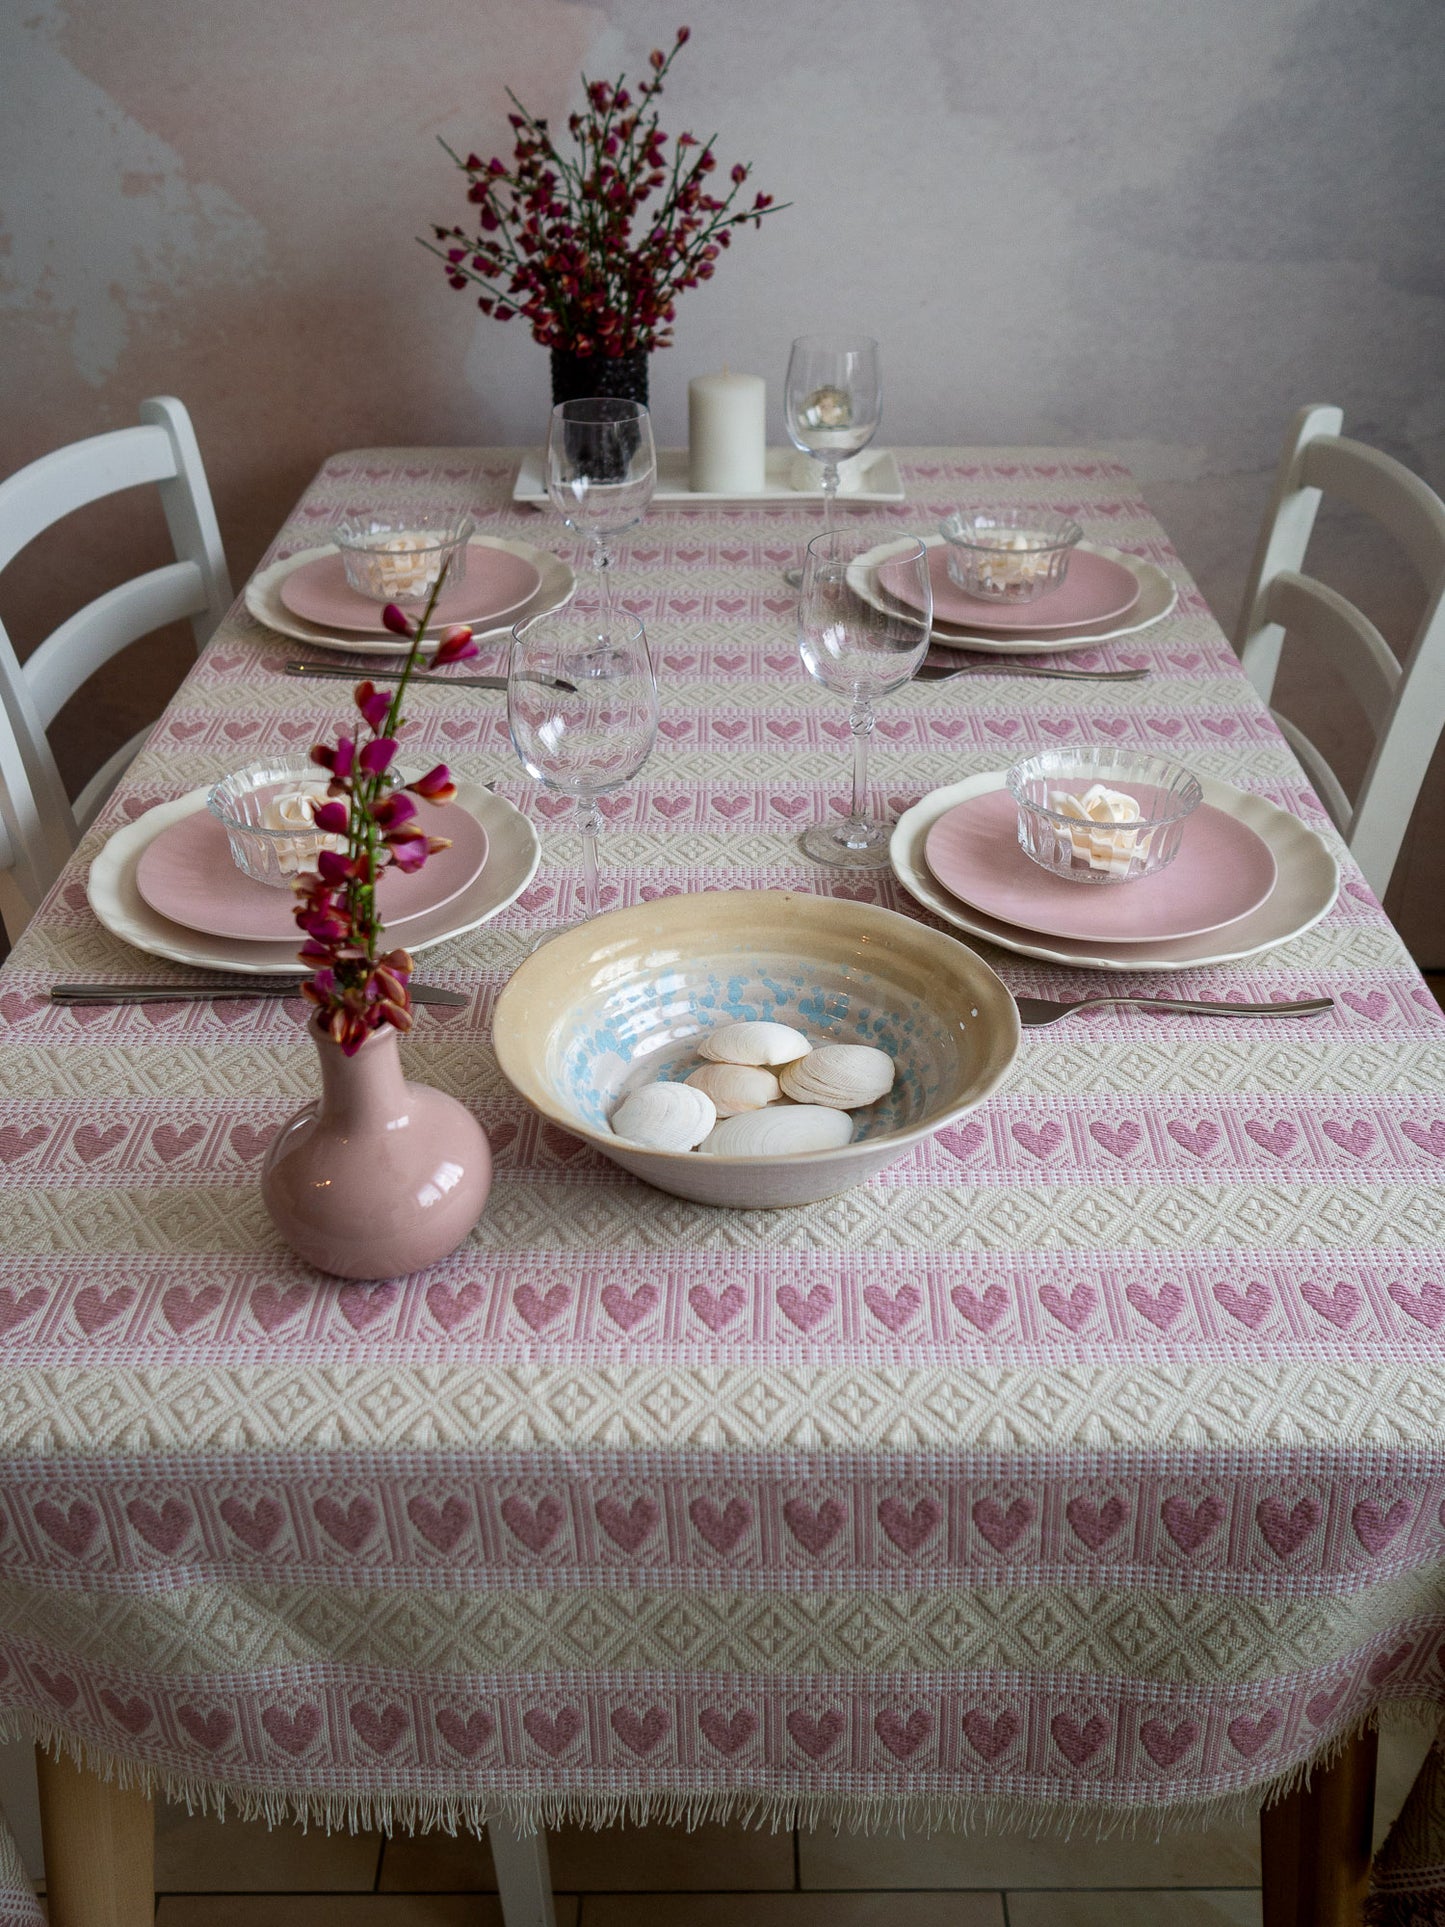 Soft Pink and Beige Tablecloth